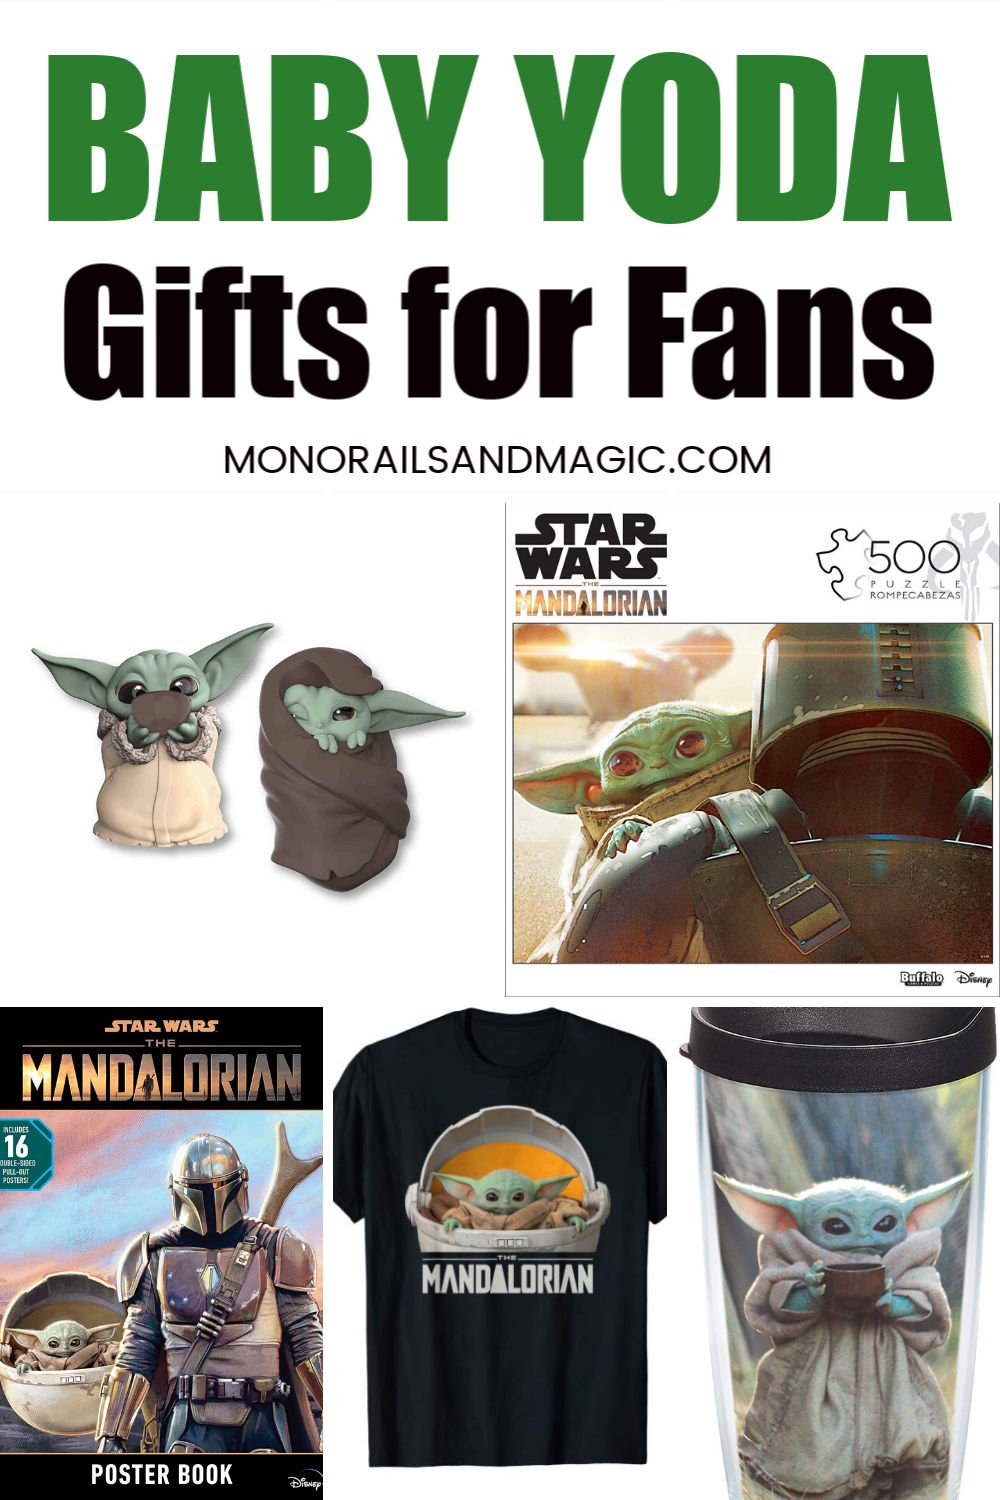 Fun Baby Yoda gifts for fans of all ages.